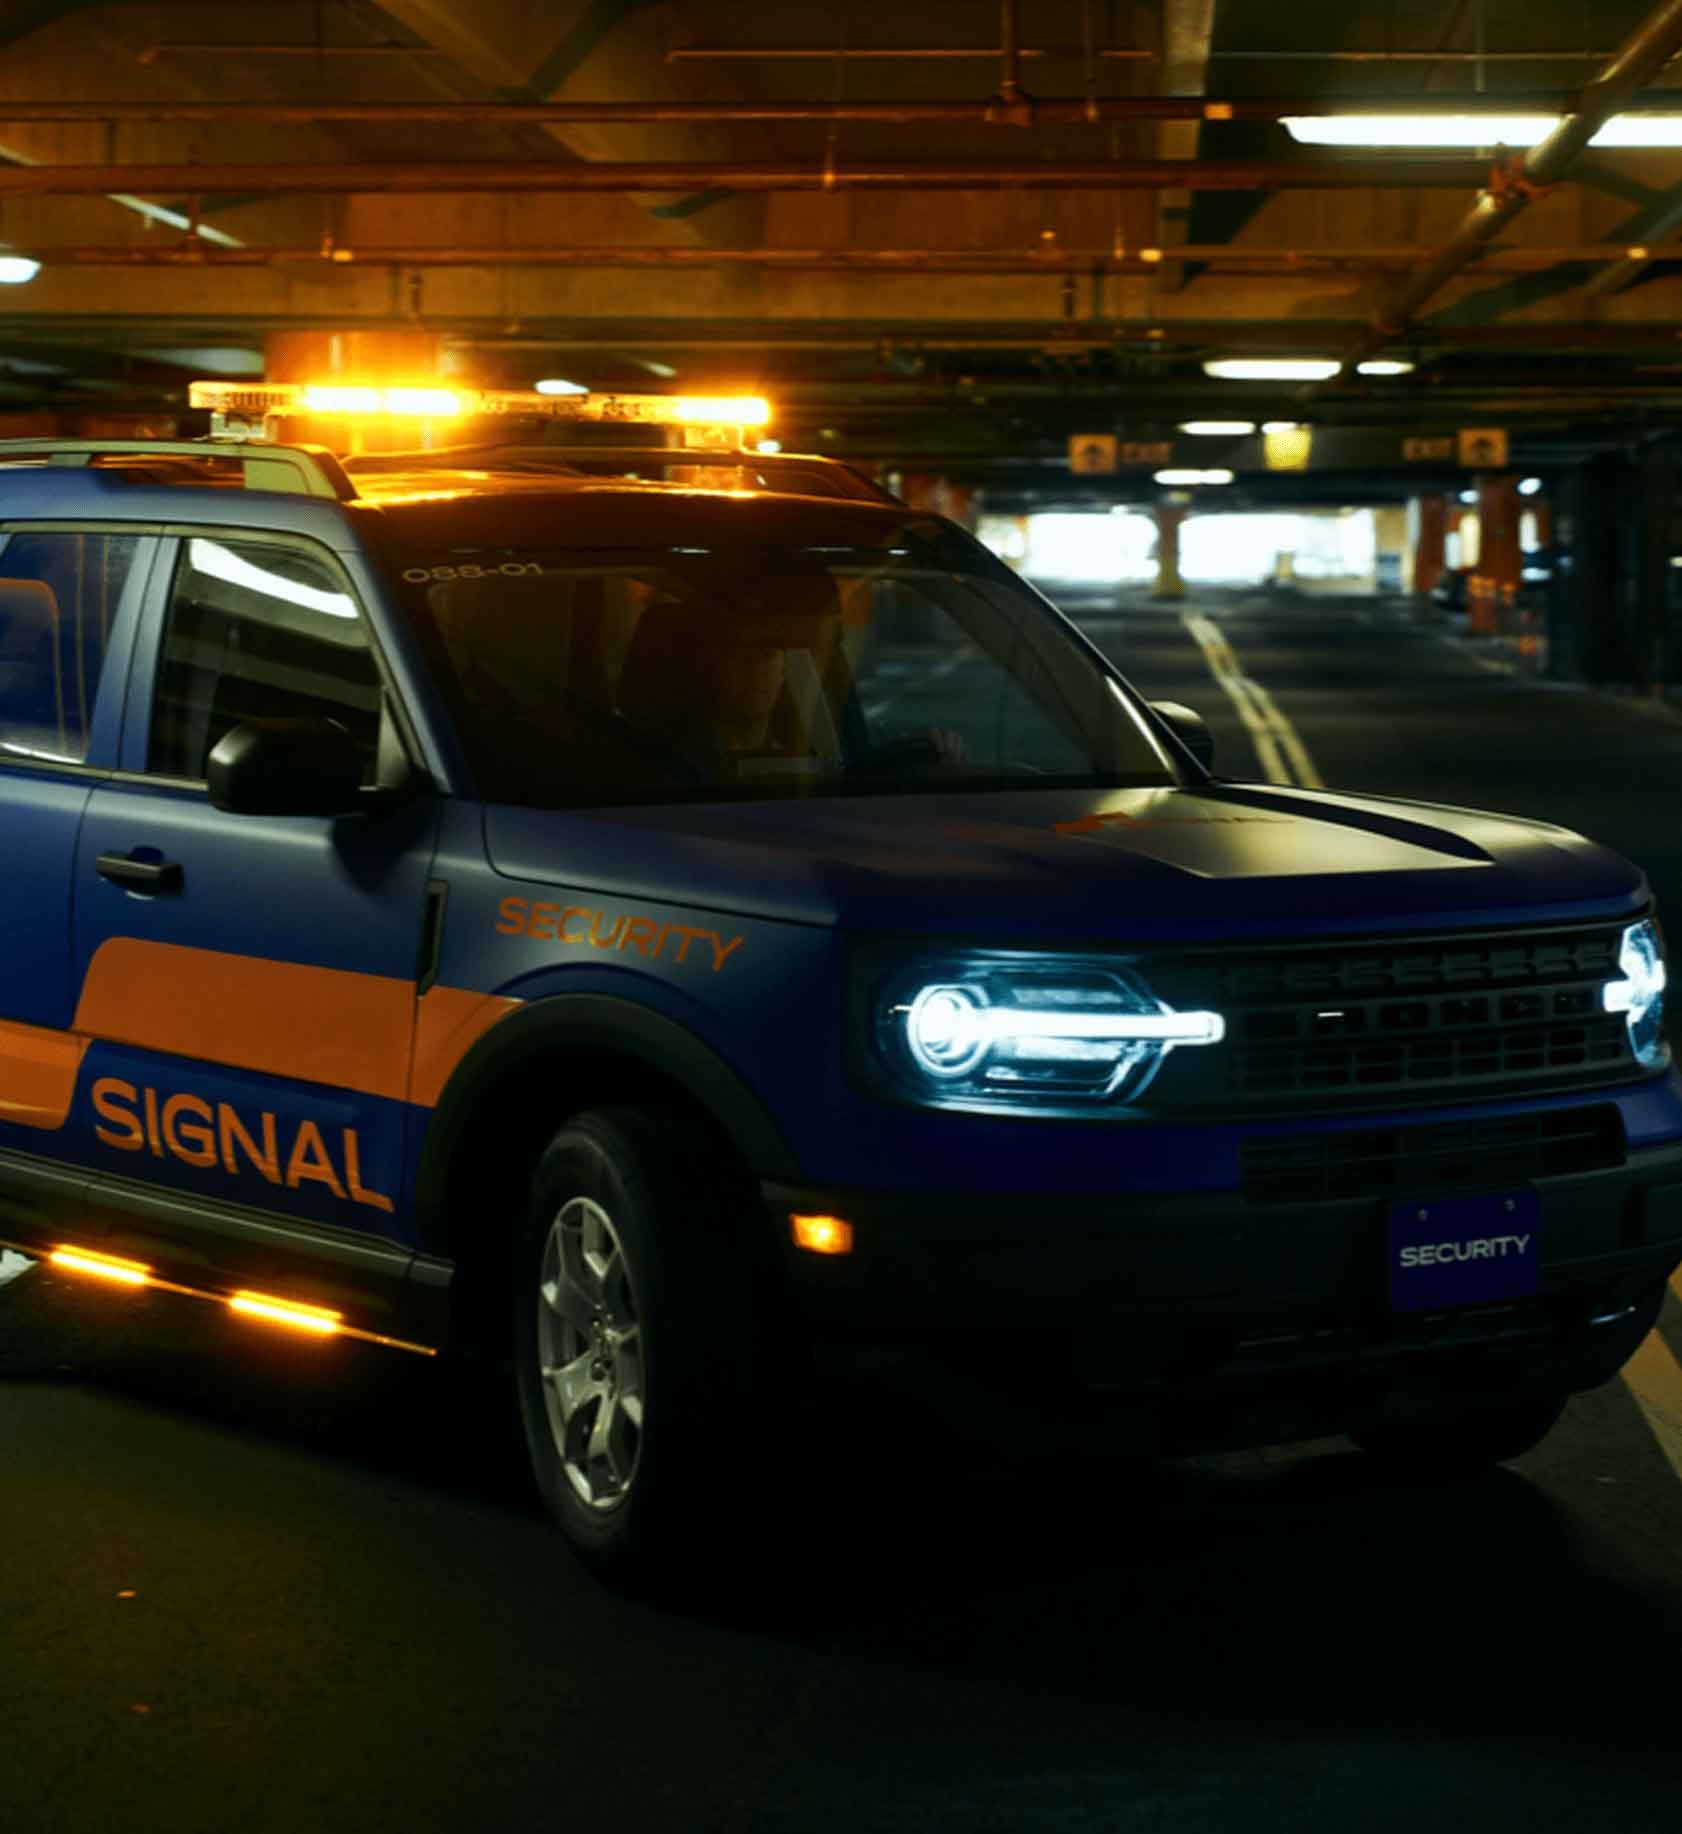 Signal company vehicle inside of a parking garage